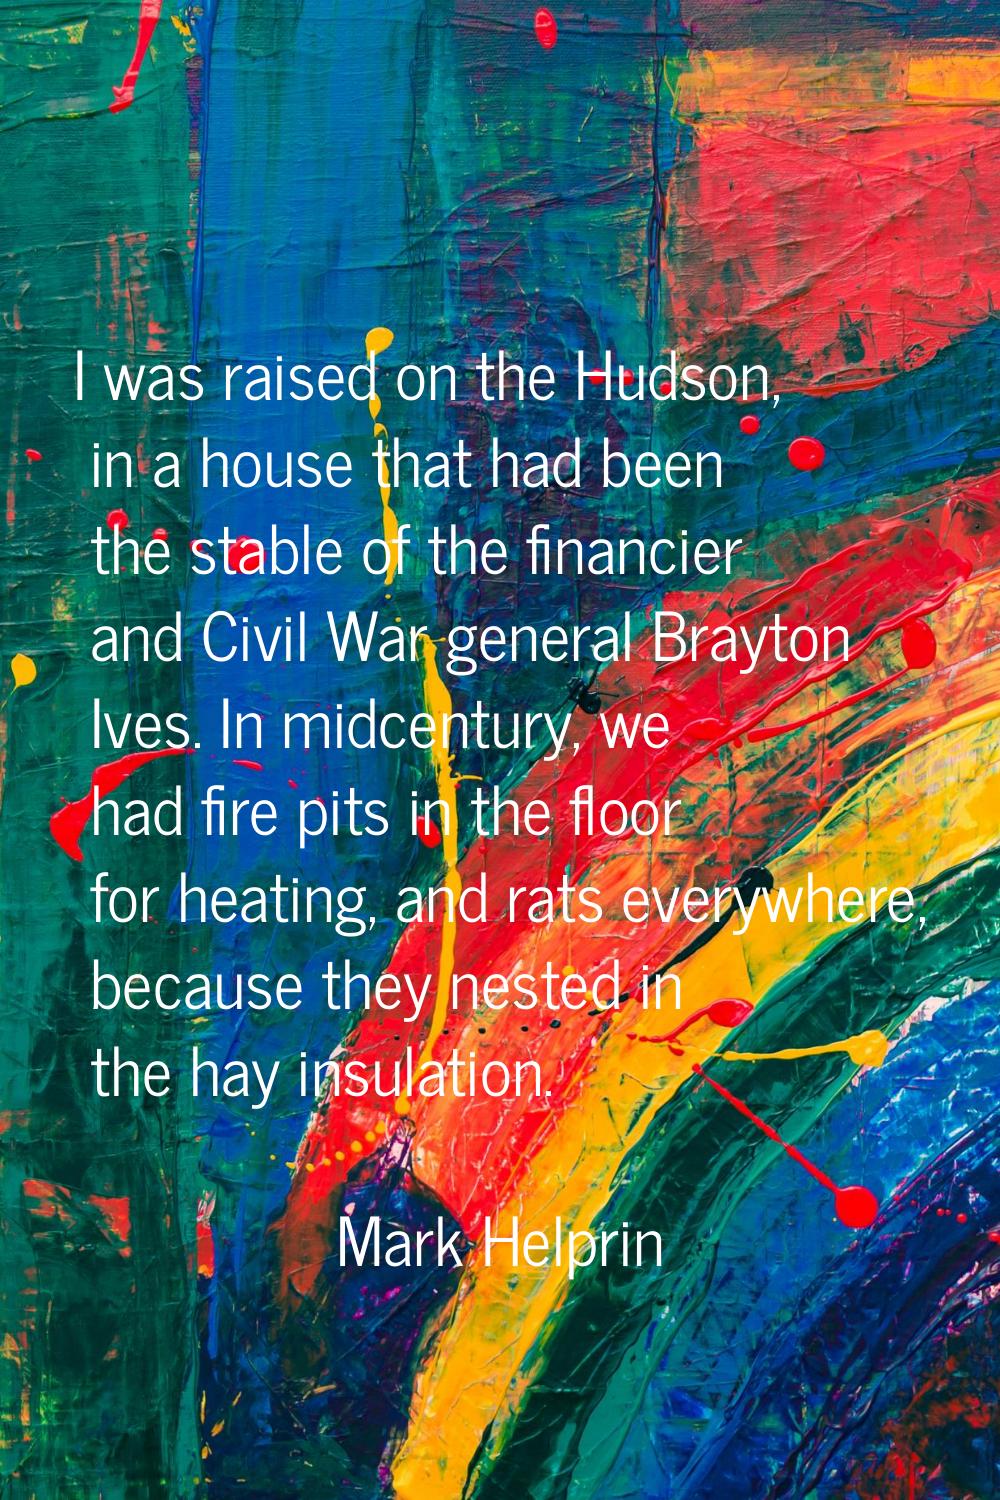 I was raised on the Hudson, in a house that had been the stable of the financier and Civil War gene